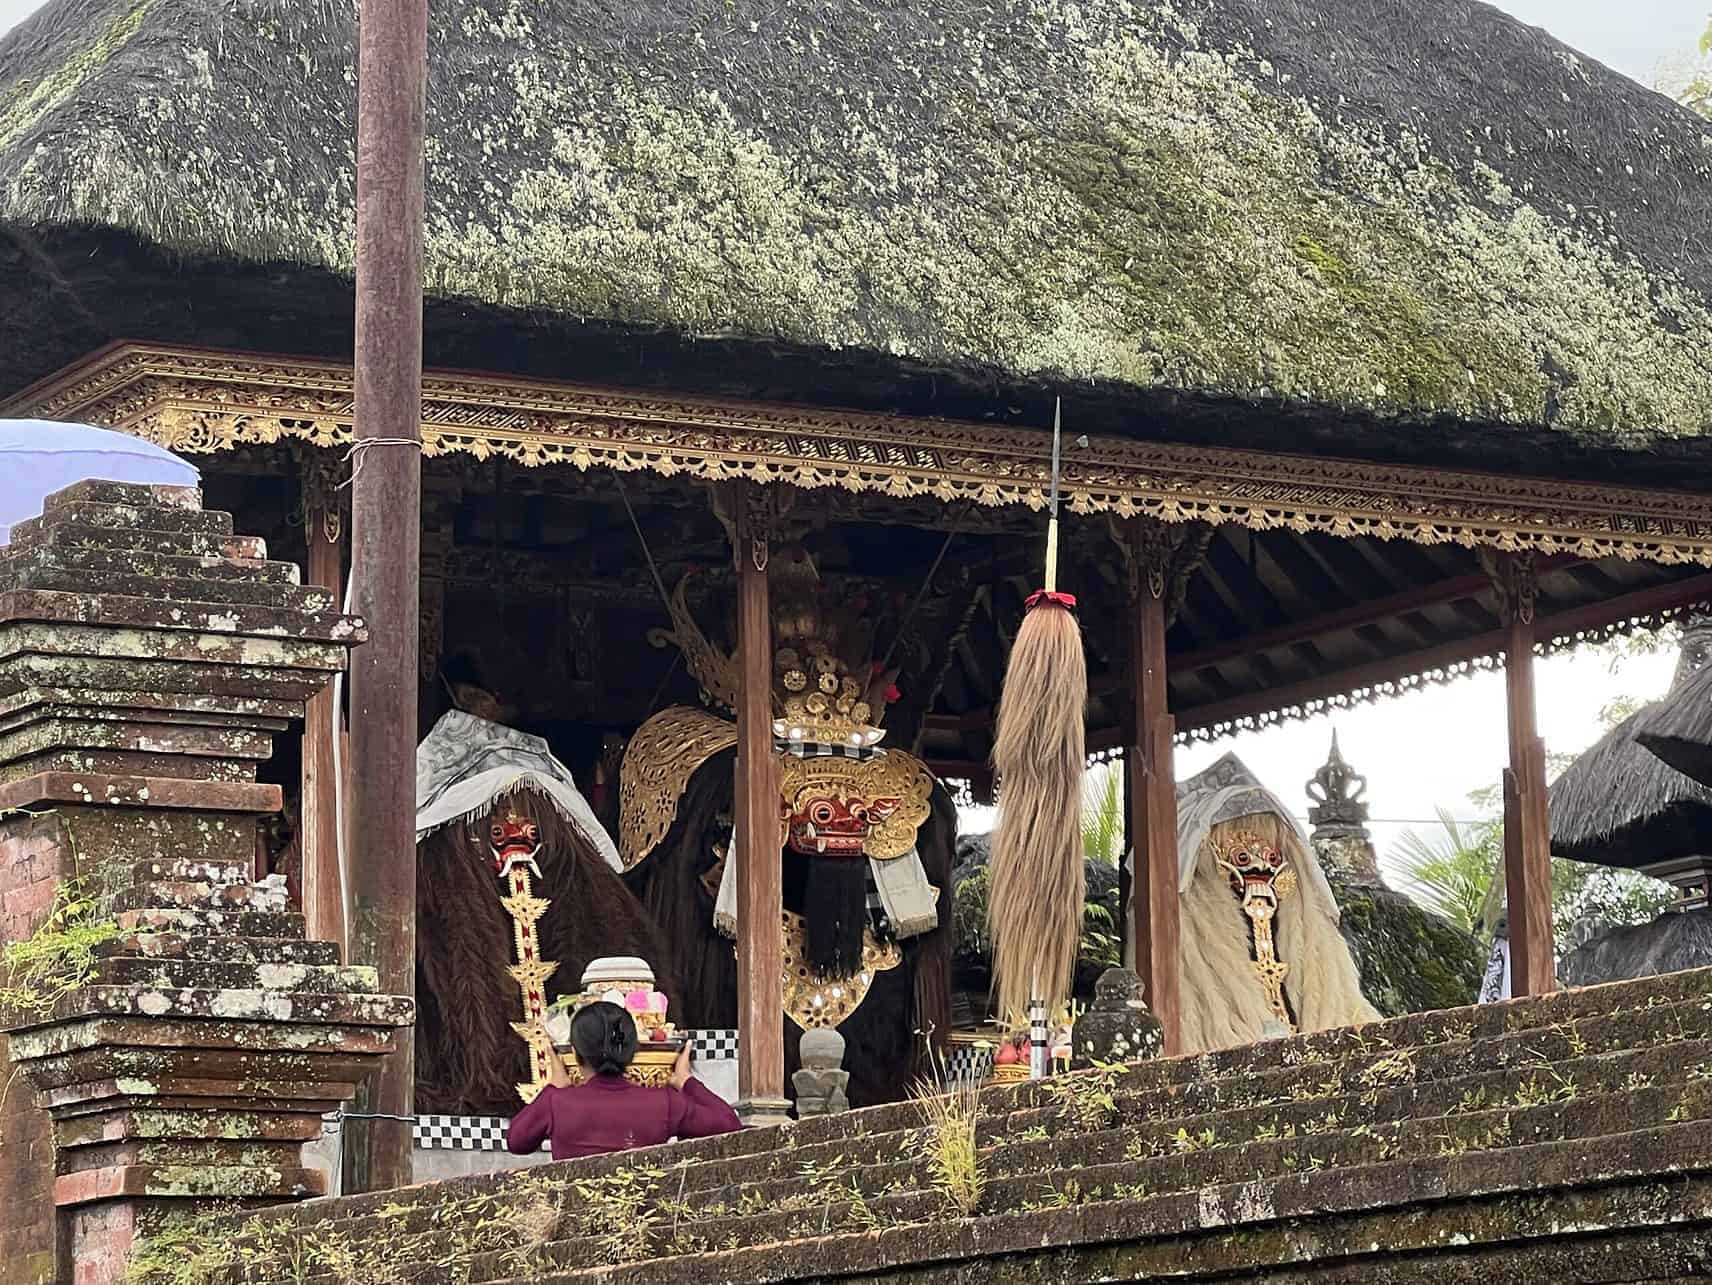 Representation of the gods in the temple, Bali, Indonesia.